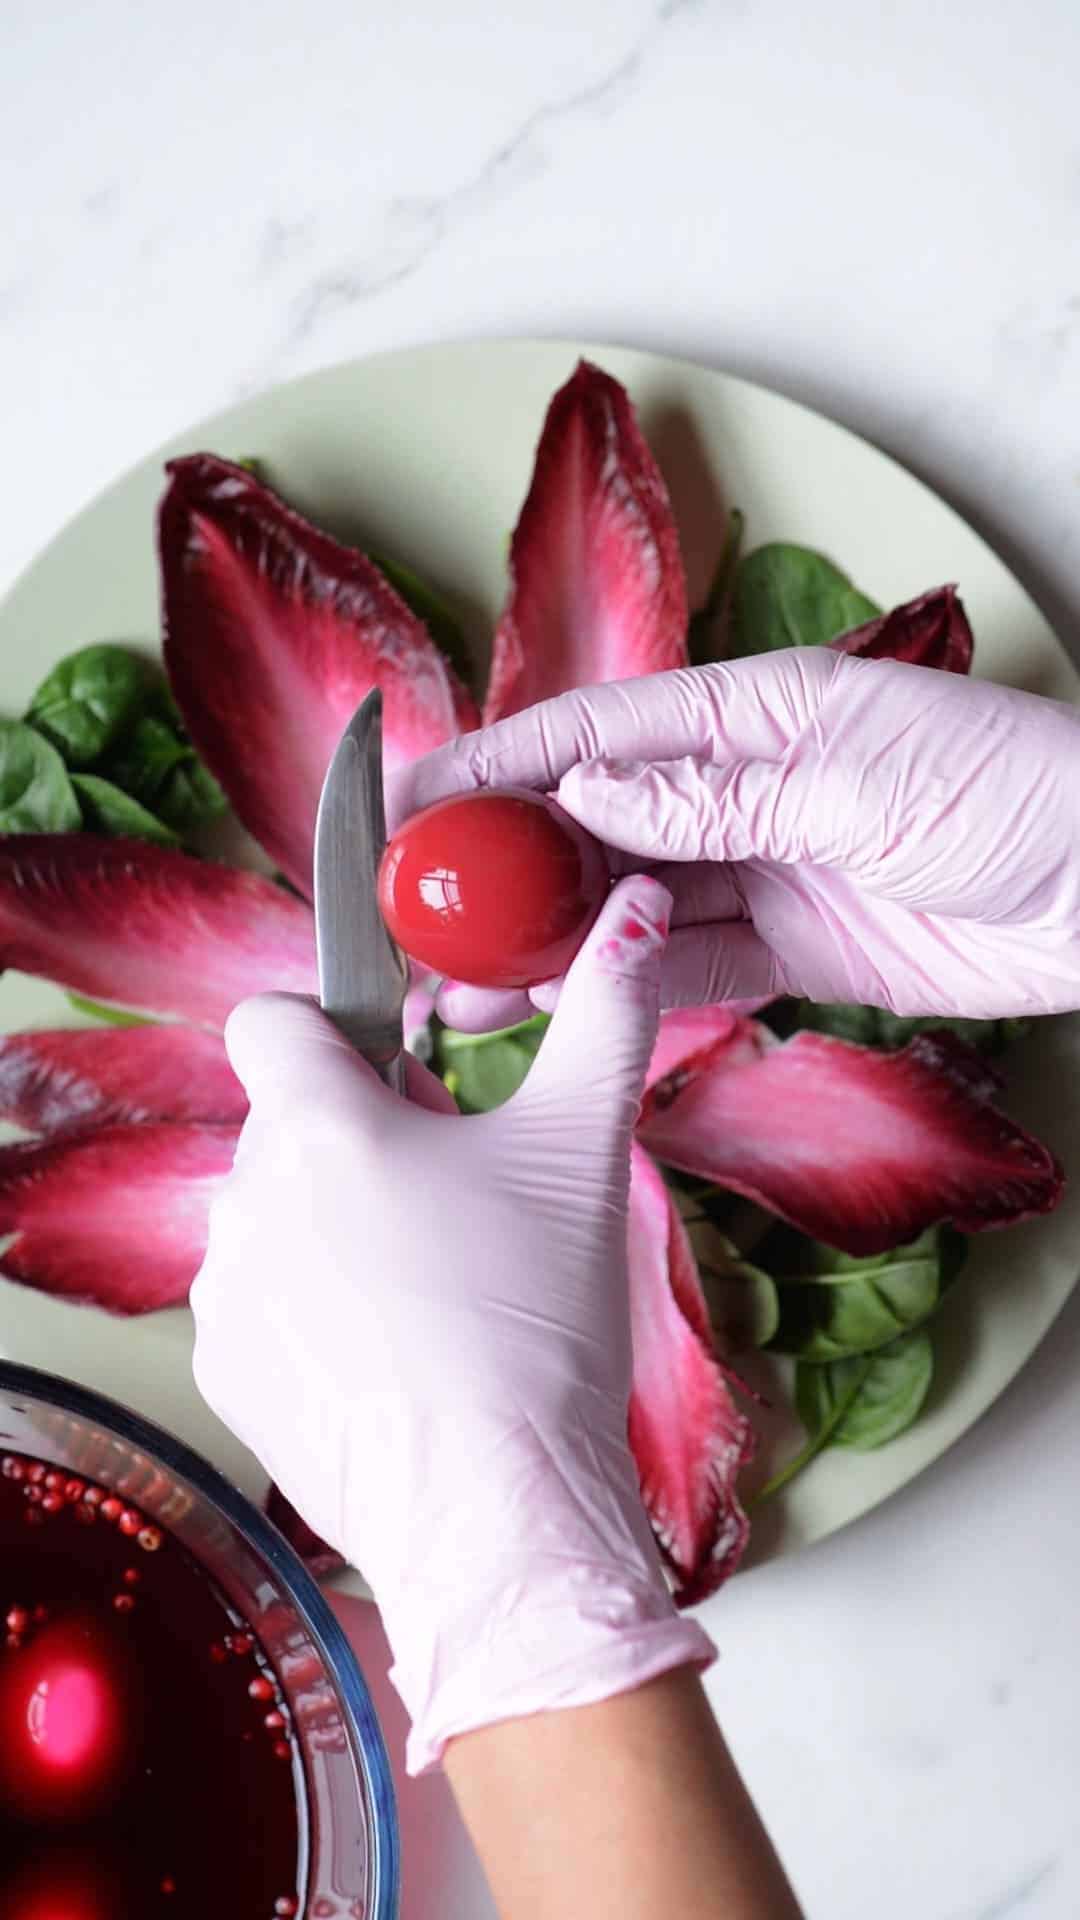 Cutting a naturally-colored pink egg